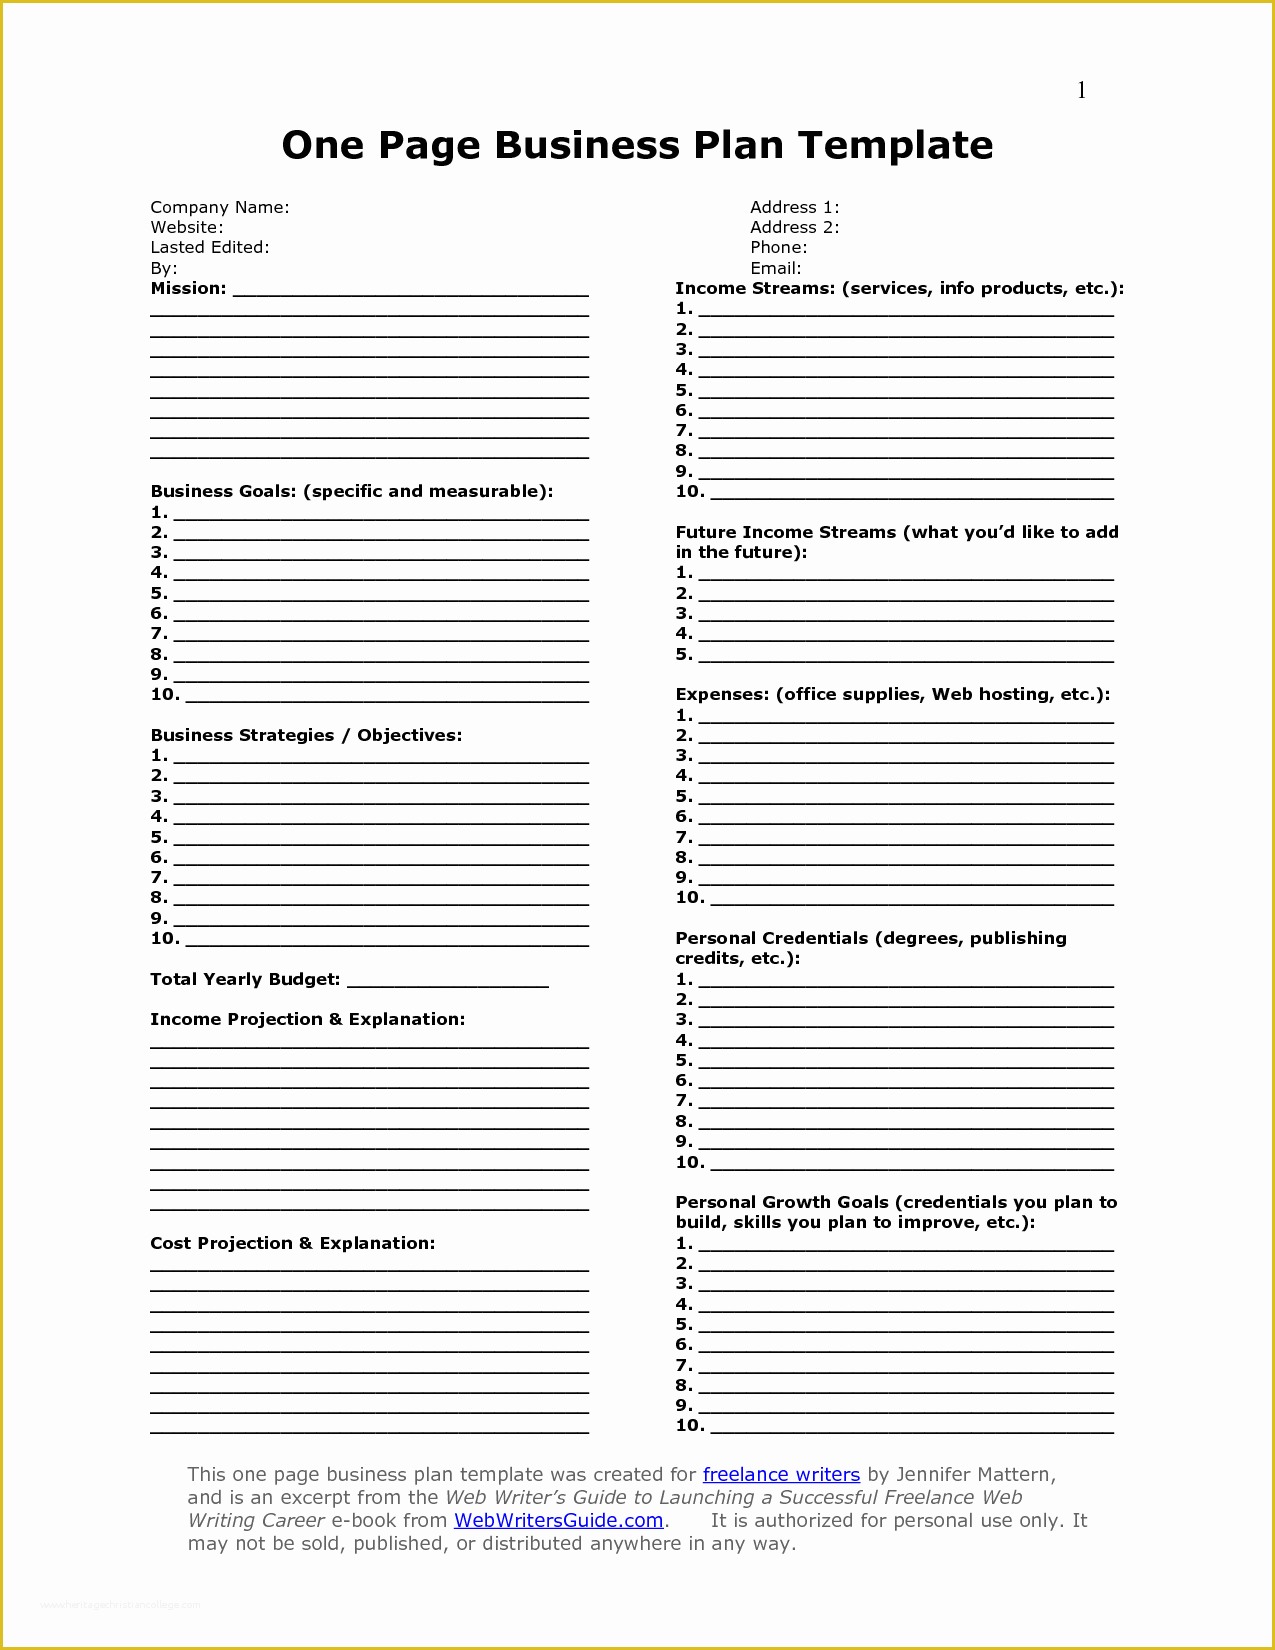 Business Plan Template Free Download Of E Page Business Plan Template